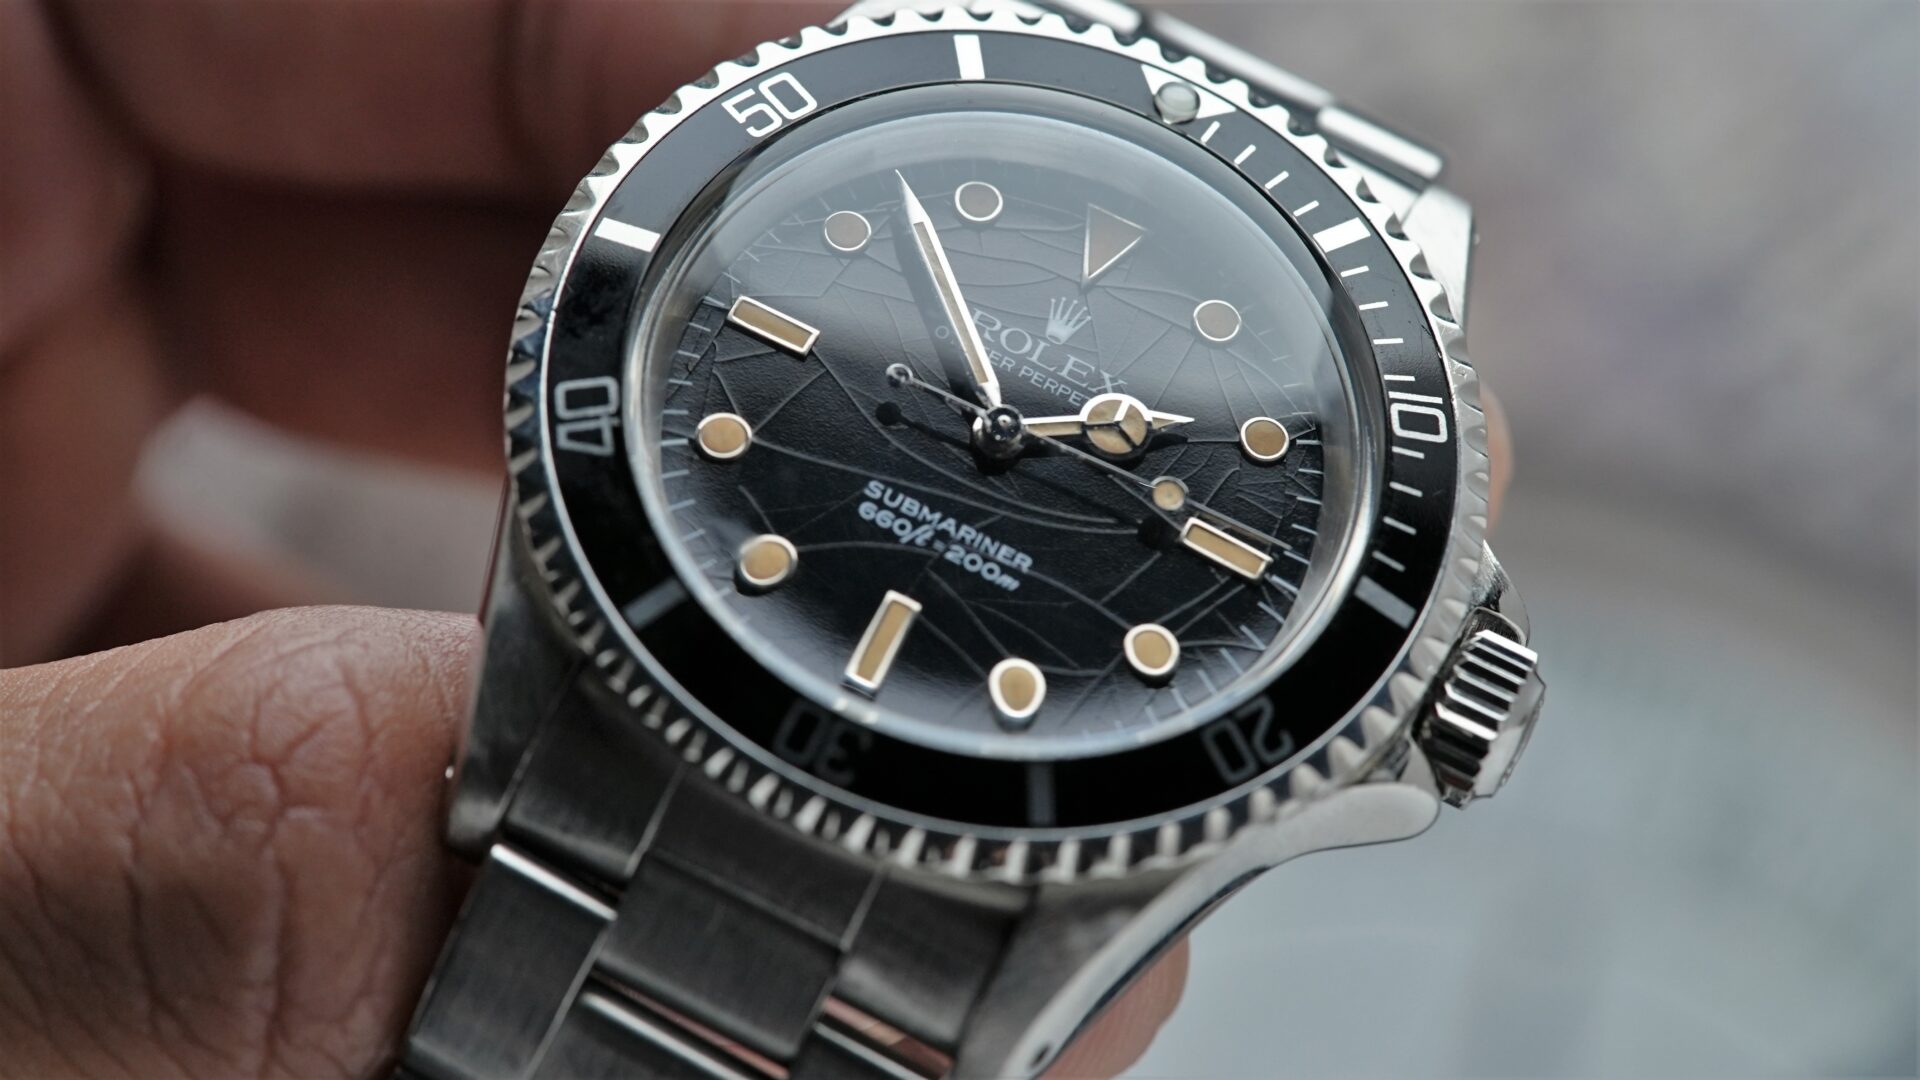 Rolex Submariner 5513 1979 Mark 3. Spider dial featured under perfect light to catch the "web".